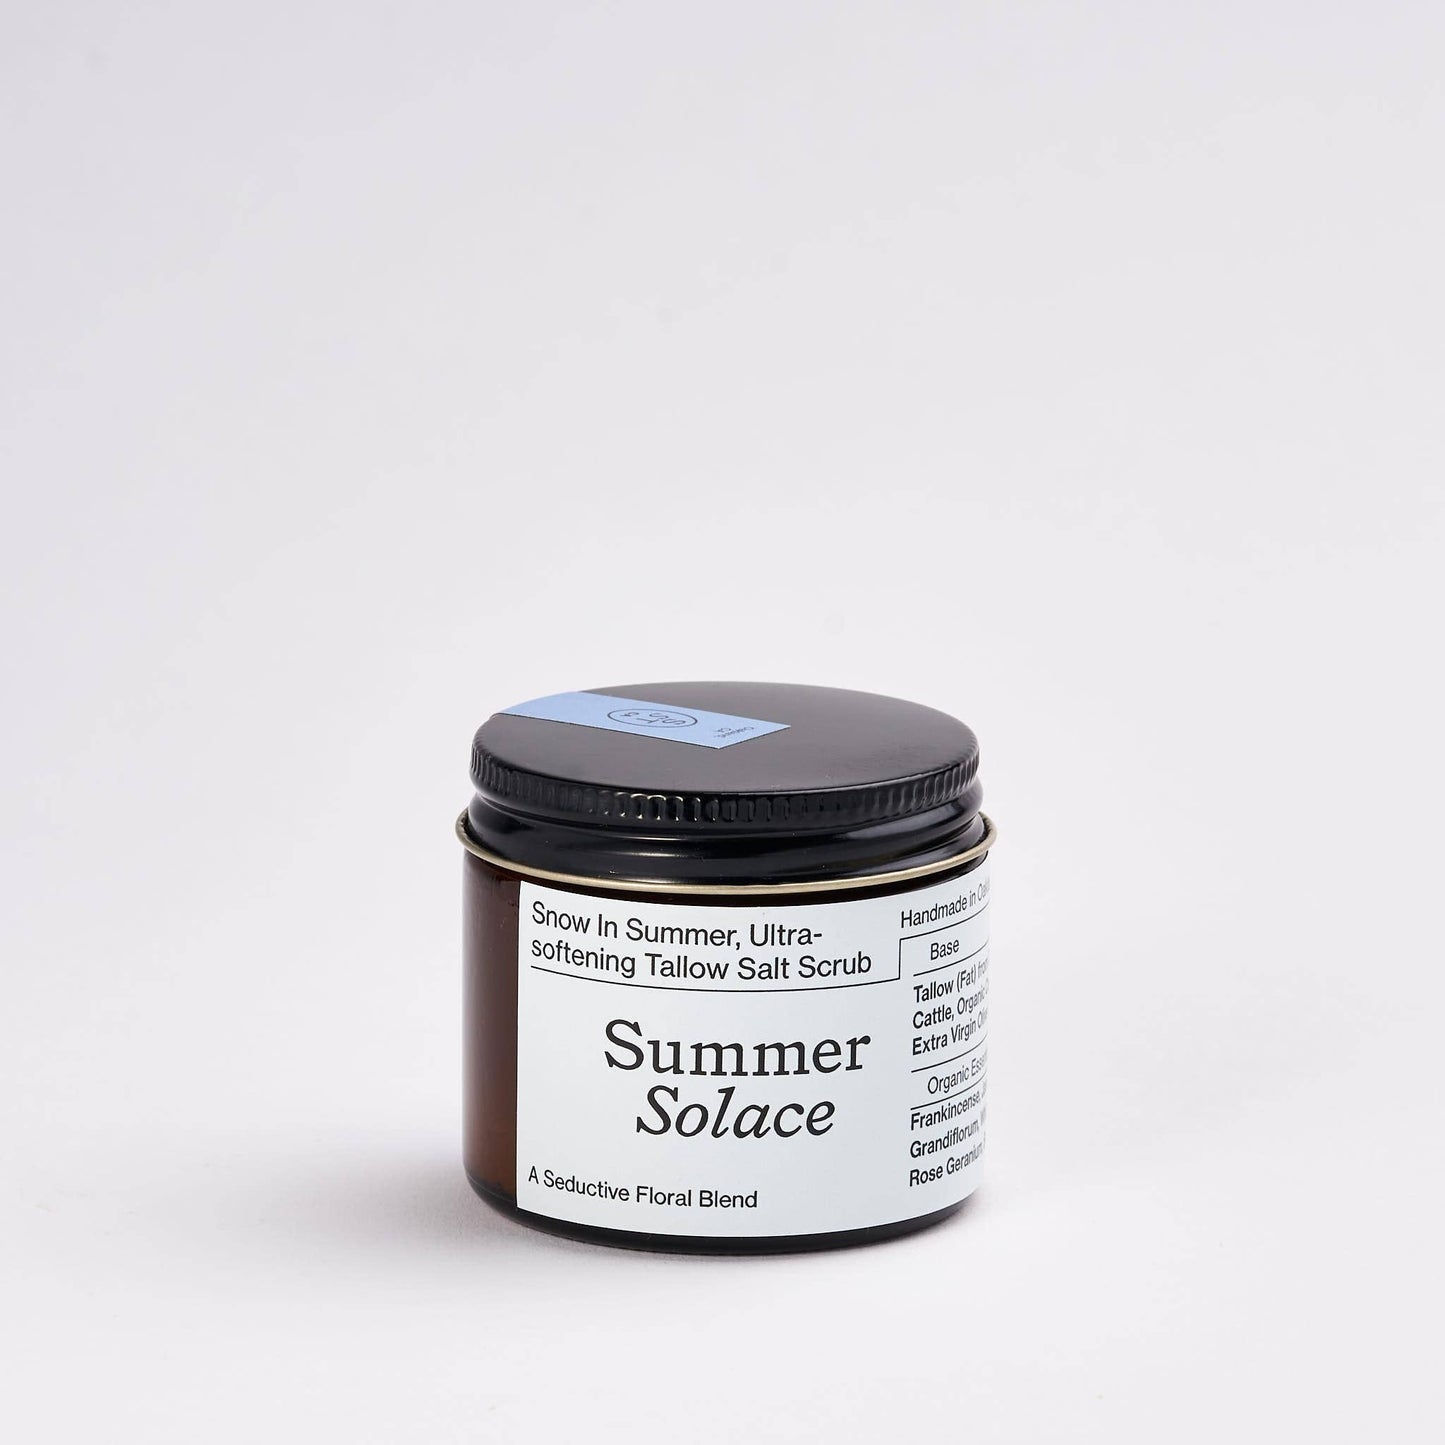 ONLINE ONLY - 
Fat & the Moon Snow in Summer: Sel Gris Face & Body Tallow Salt Scrub